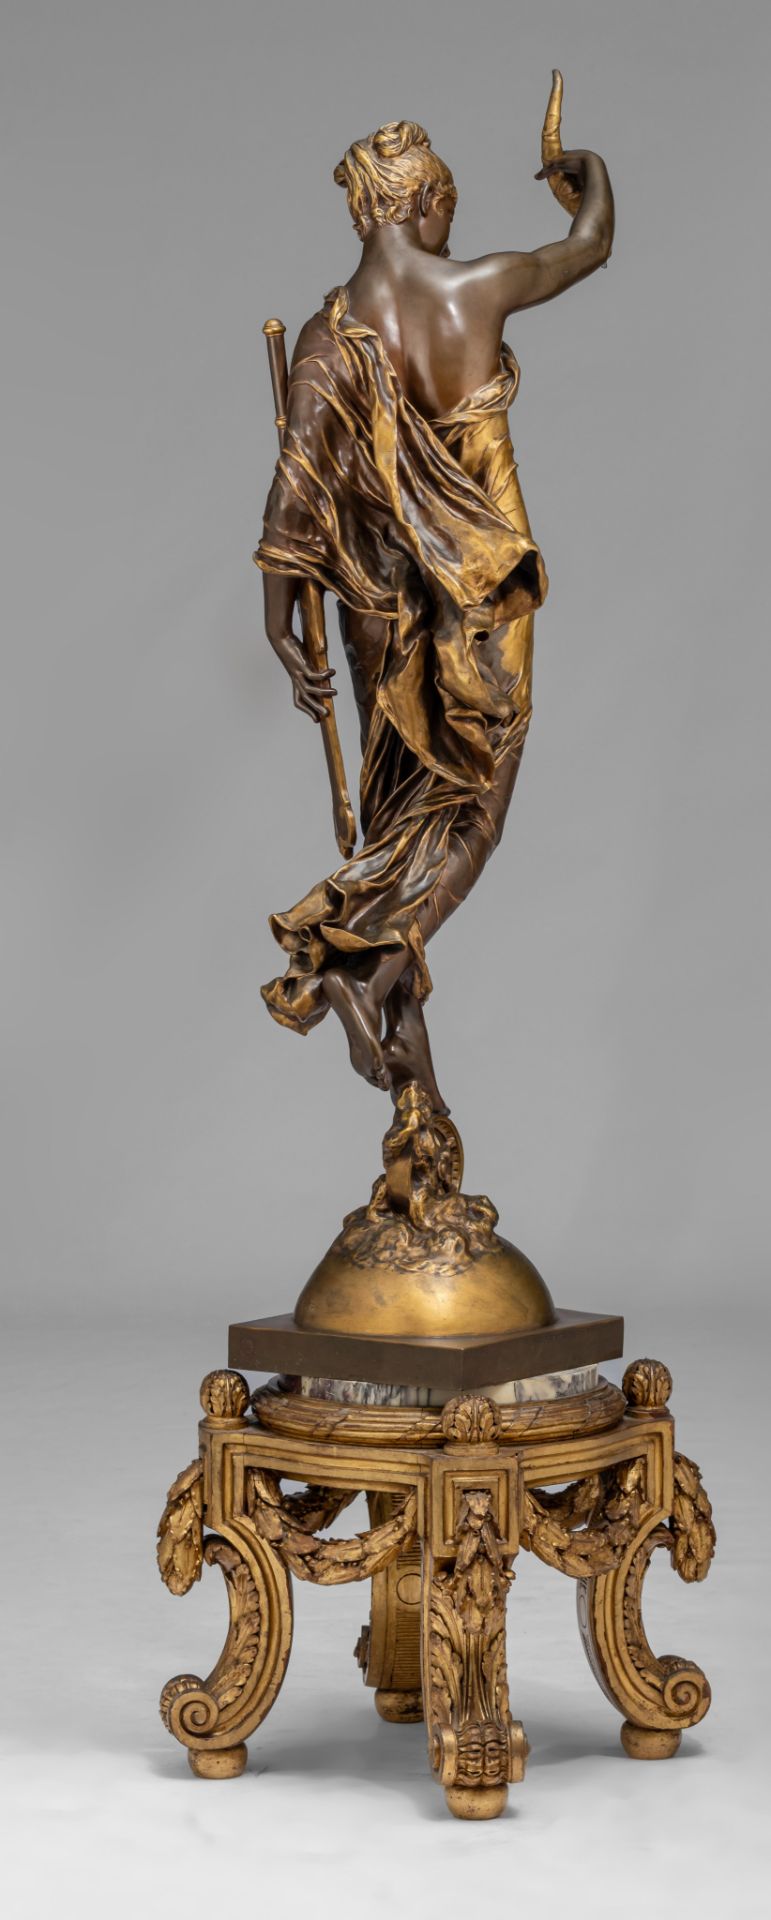 Paul Moreau-Vauthier (1871-1936), 'Fortuna', 1878, gilt and patinated bronze on a matching pedestal, - Image 5 of 14